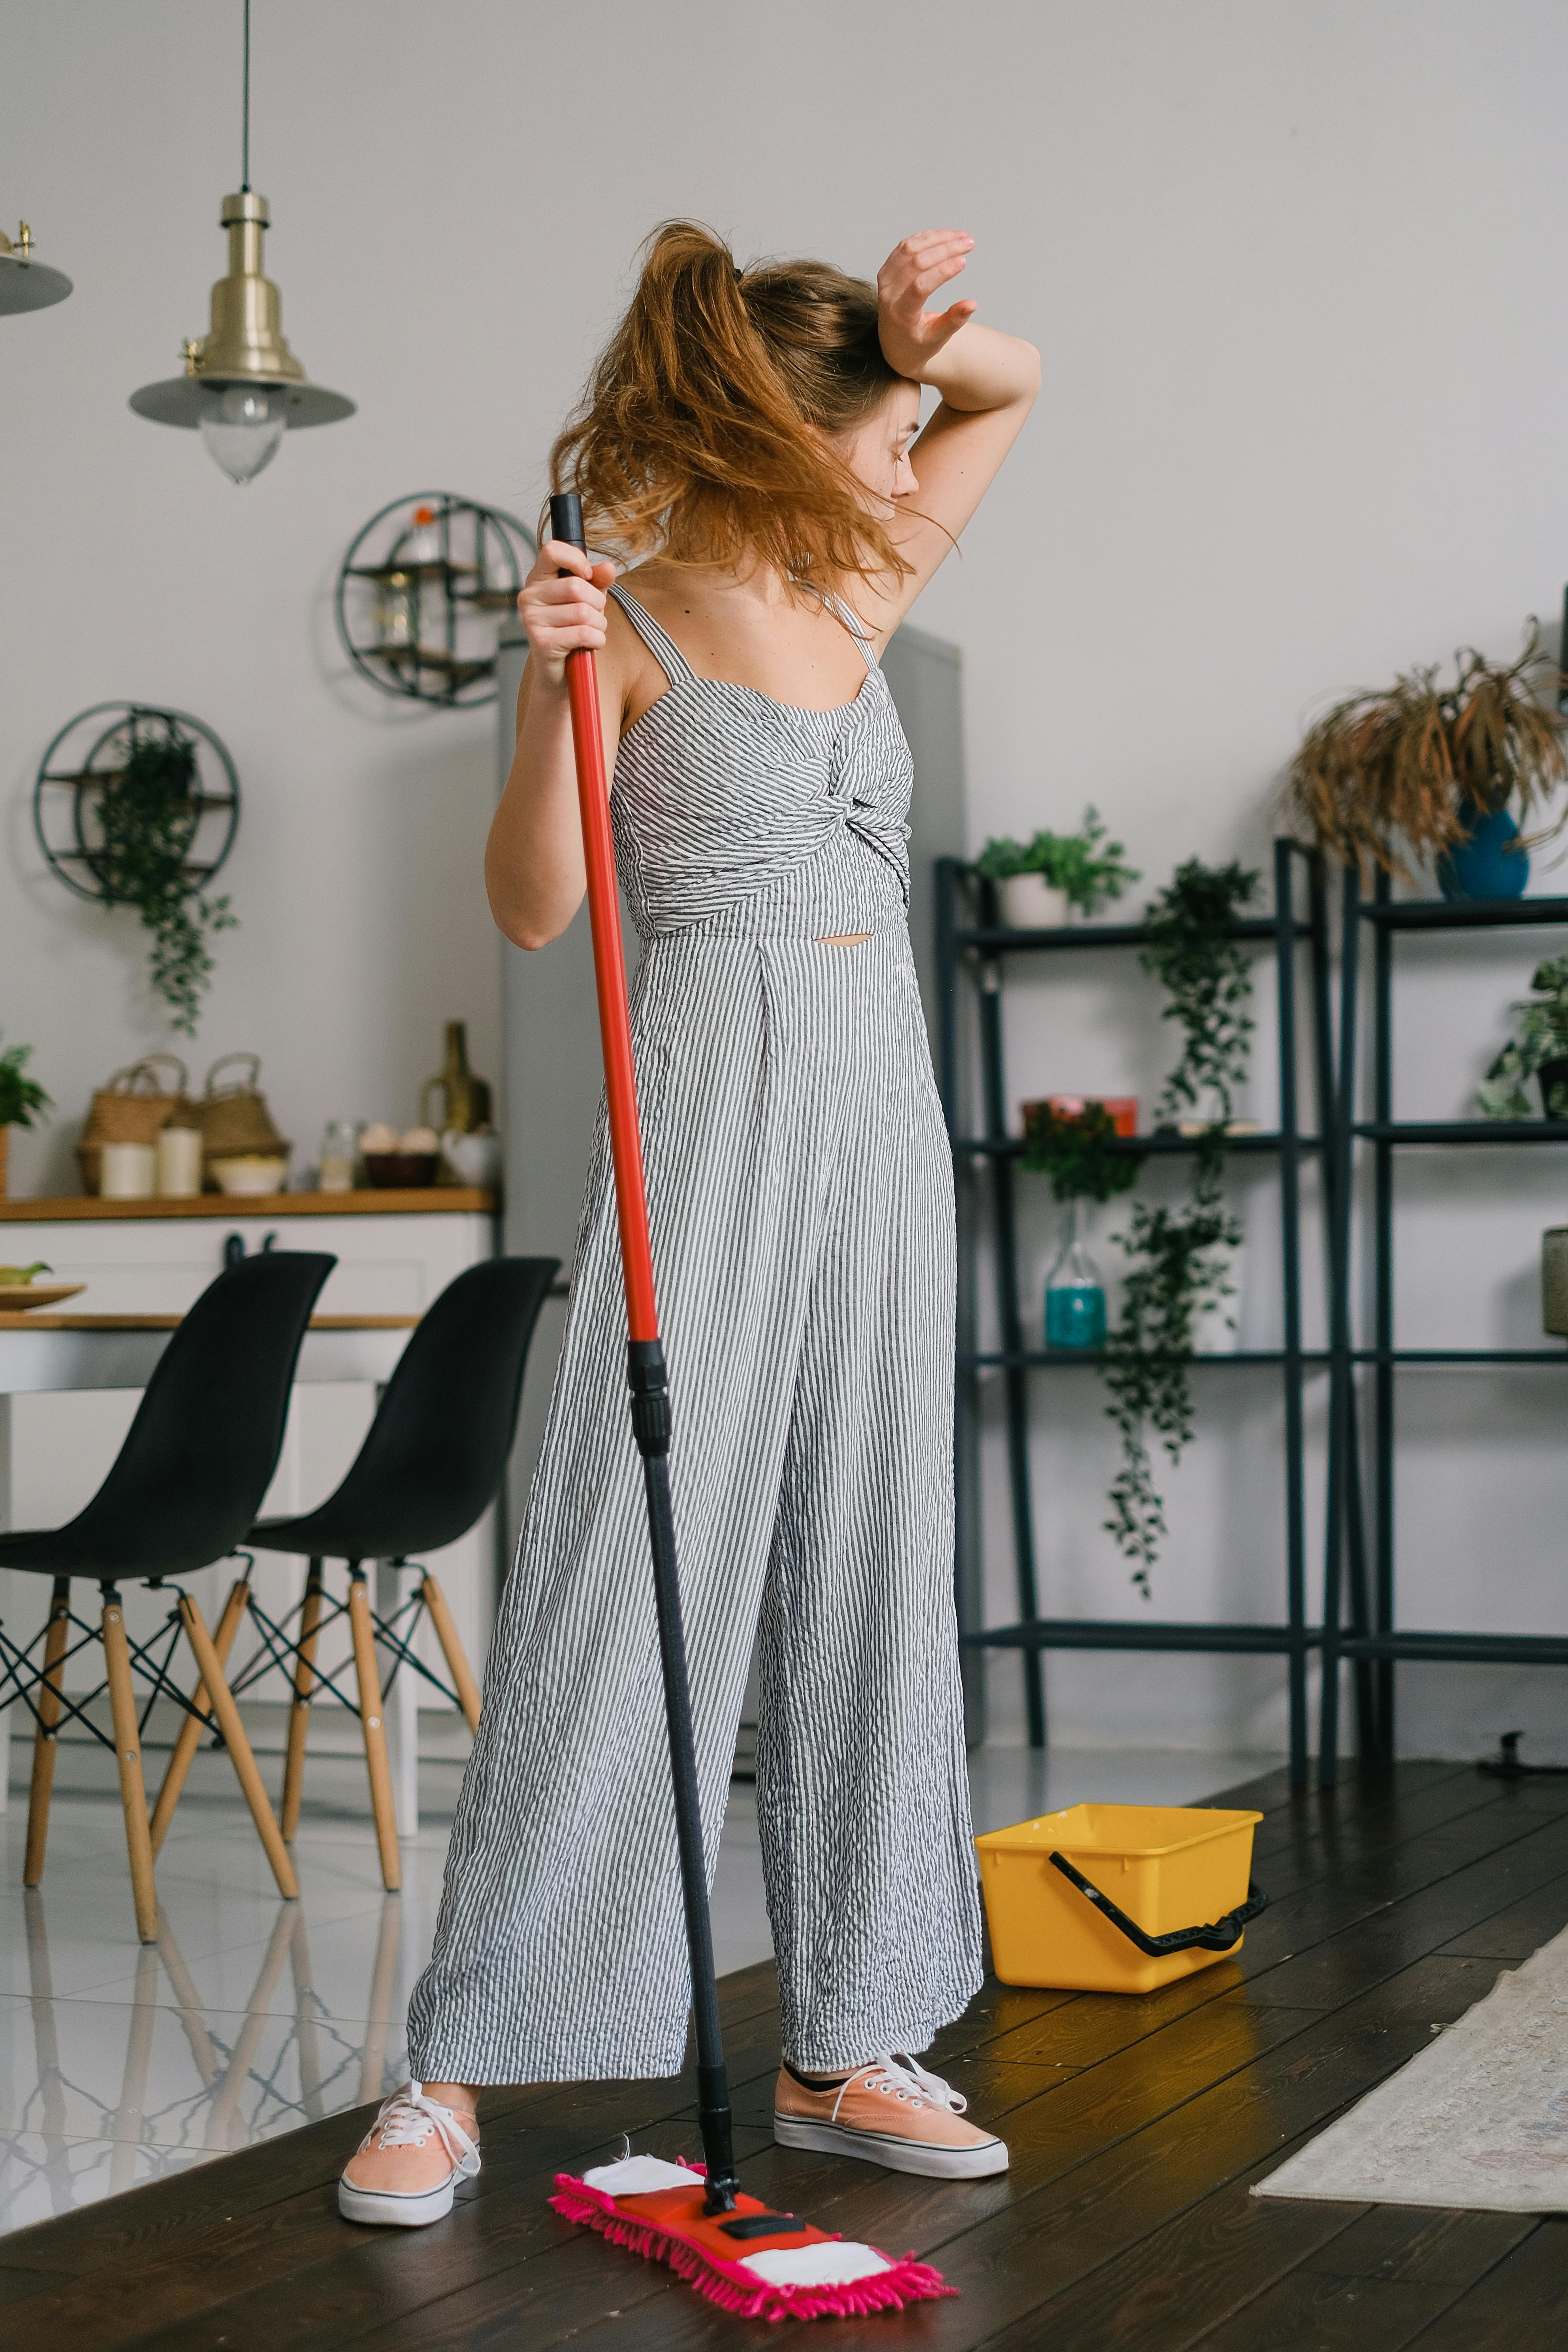 Tired woman with a mop during housework | Source: Pexels